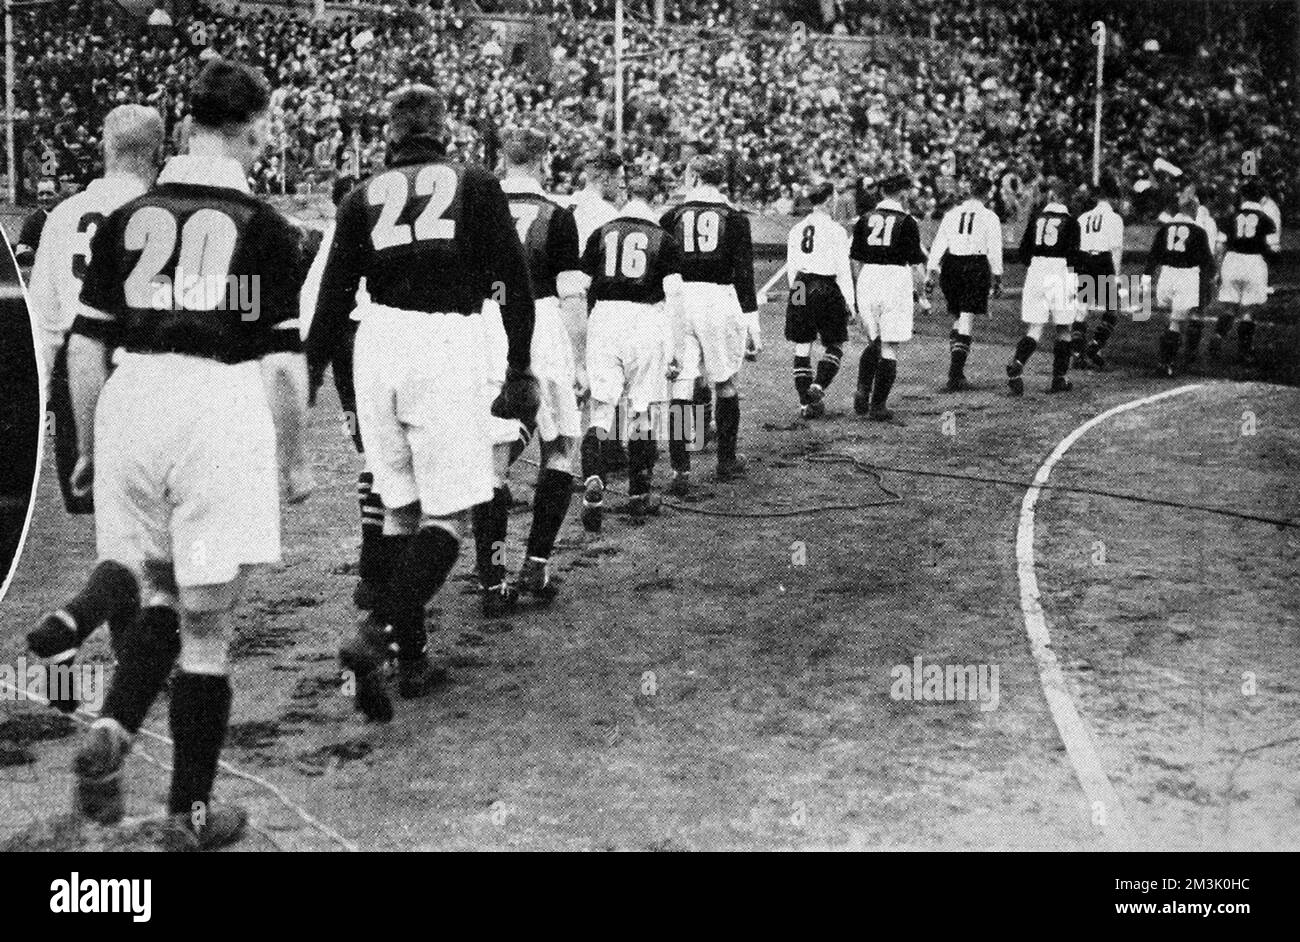 The Everton (light shirts) and Manchester City (dark shirts) teams walking onto the pitch at Wembley Stadium, prior to the start of the F.A. Cup Final of 1933. Everton won the game 1-0, thanks to a goal from Dixie Dean.  This was one of the first occasions on which footballers wore numbers on the back of their shirts. The reason for this innovation was to help the BBC radio commentators and their listeners follow the action. As can be seen, Everton took the numbers 1 to 11 and Manchester City took 12 to 22.     Date: 1933 Stock Photo